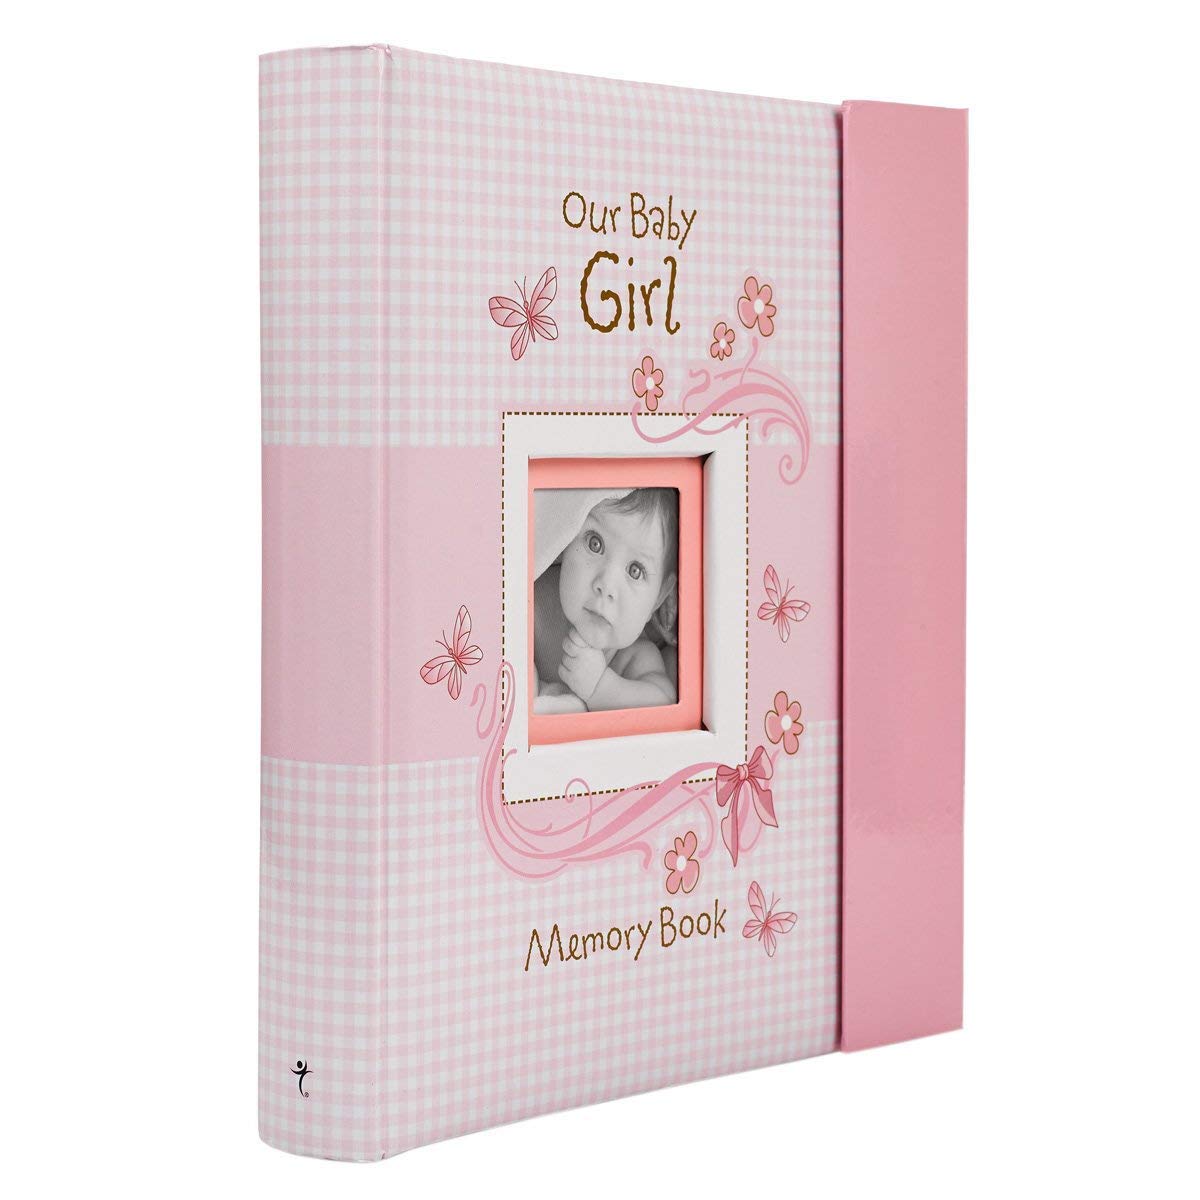 Christian Art Gifts Girl Baby Book of Memories Pink Keepsake Photo Album | Our Baby Girl Memory Book | Baby Book with Bible Verses, The First Year